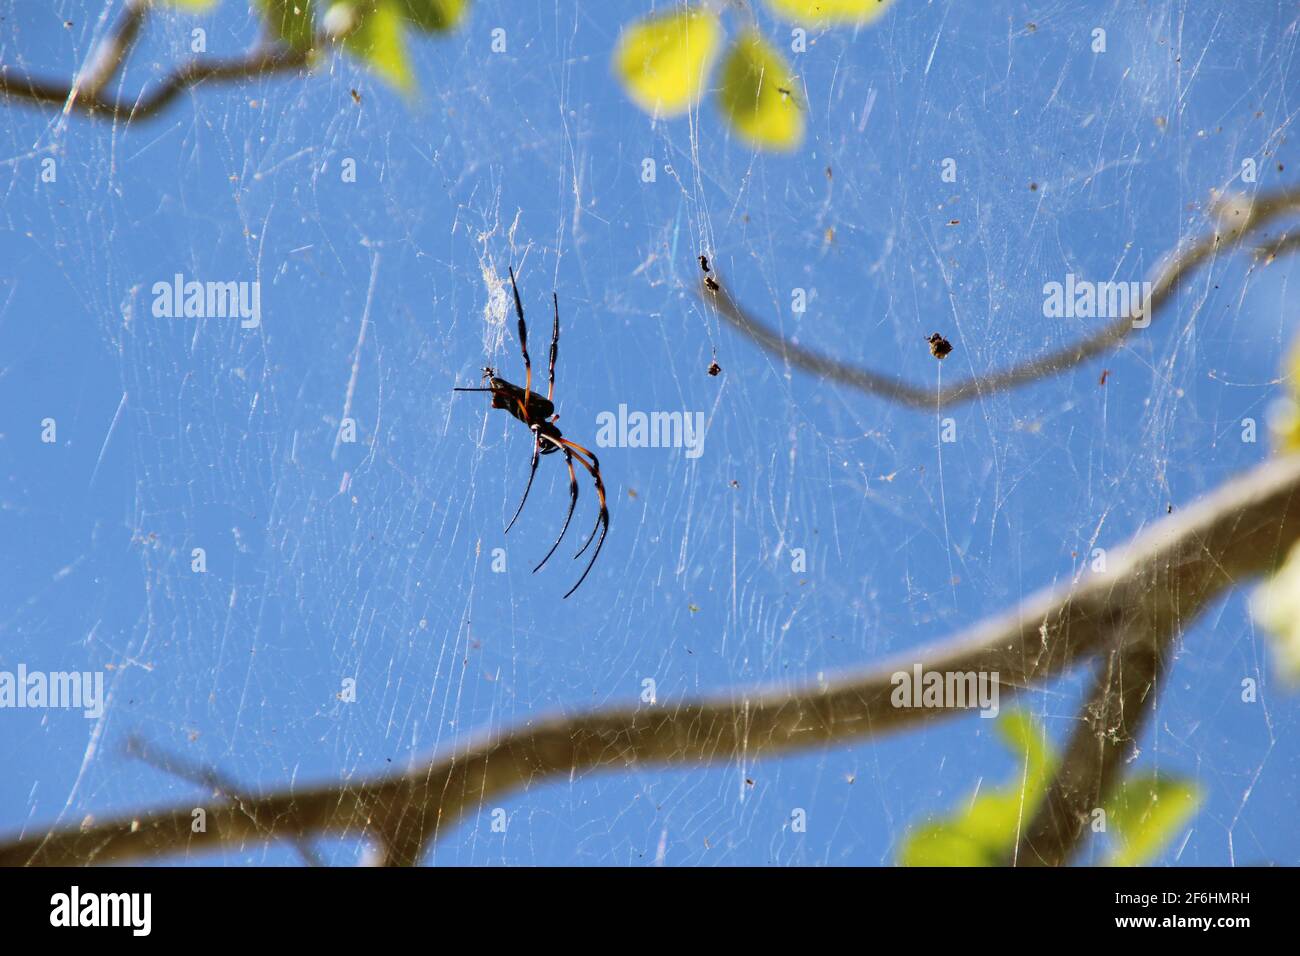 Spider in close up view with blue sky background (Asia) Stock Photo